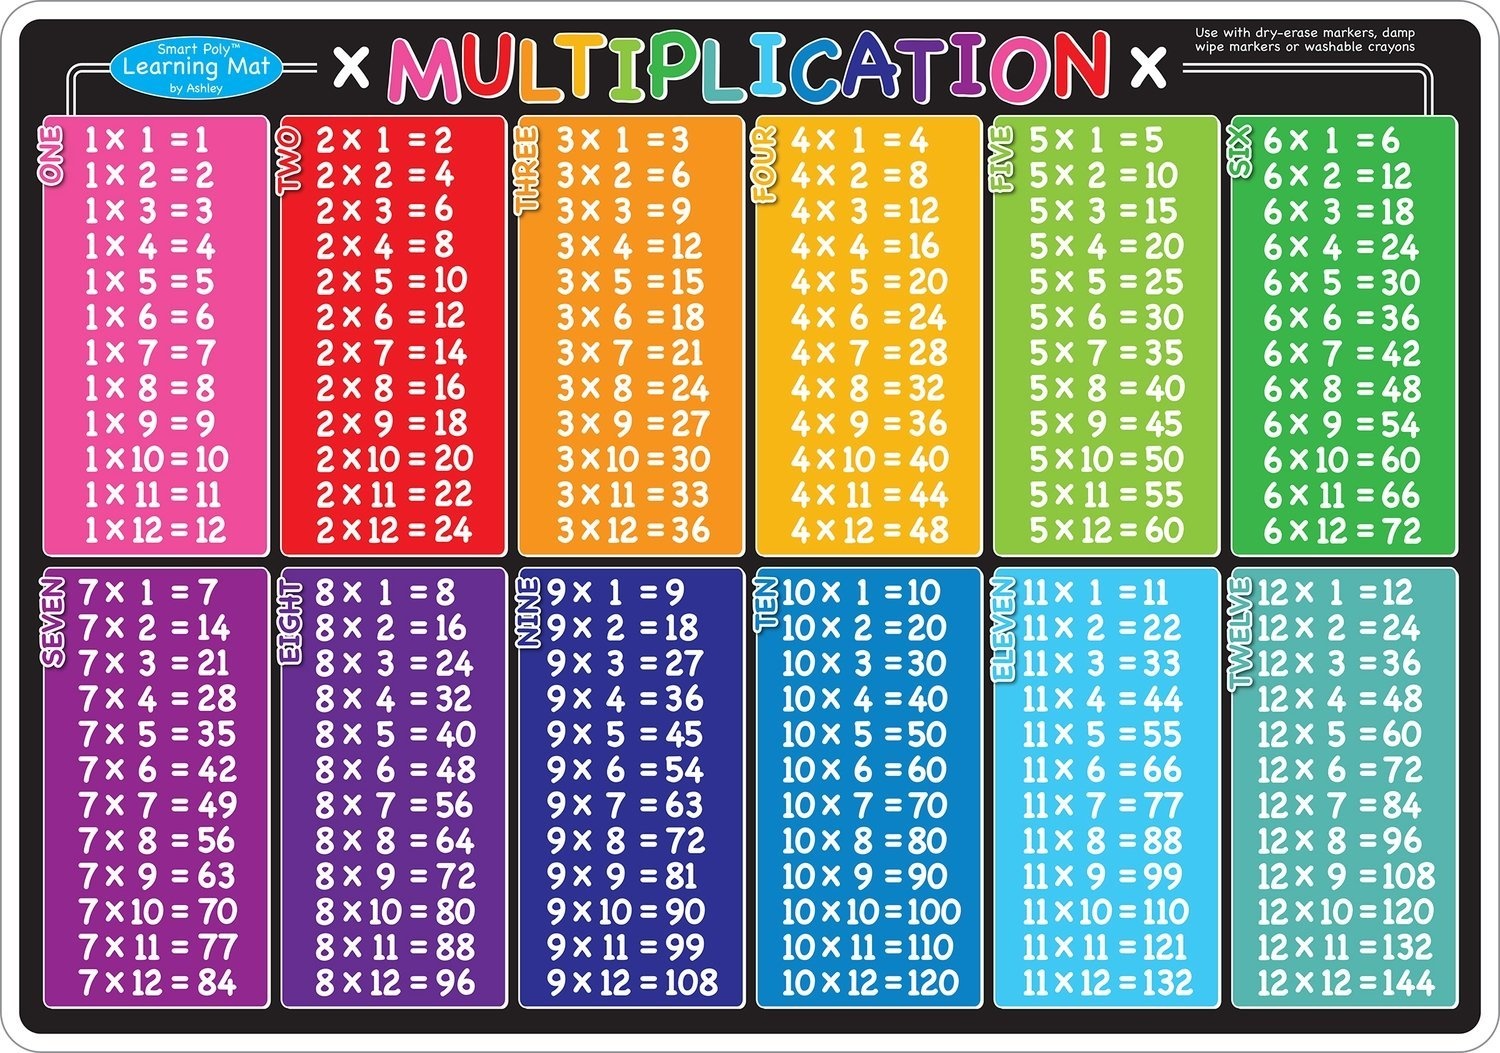 9 times table chart up to 100